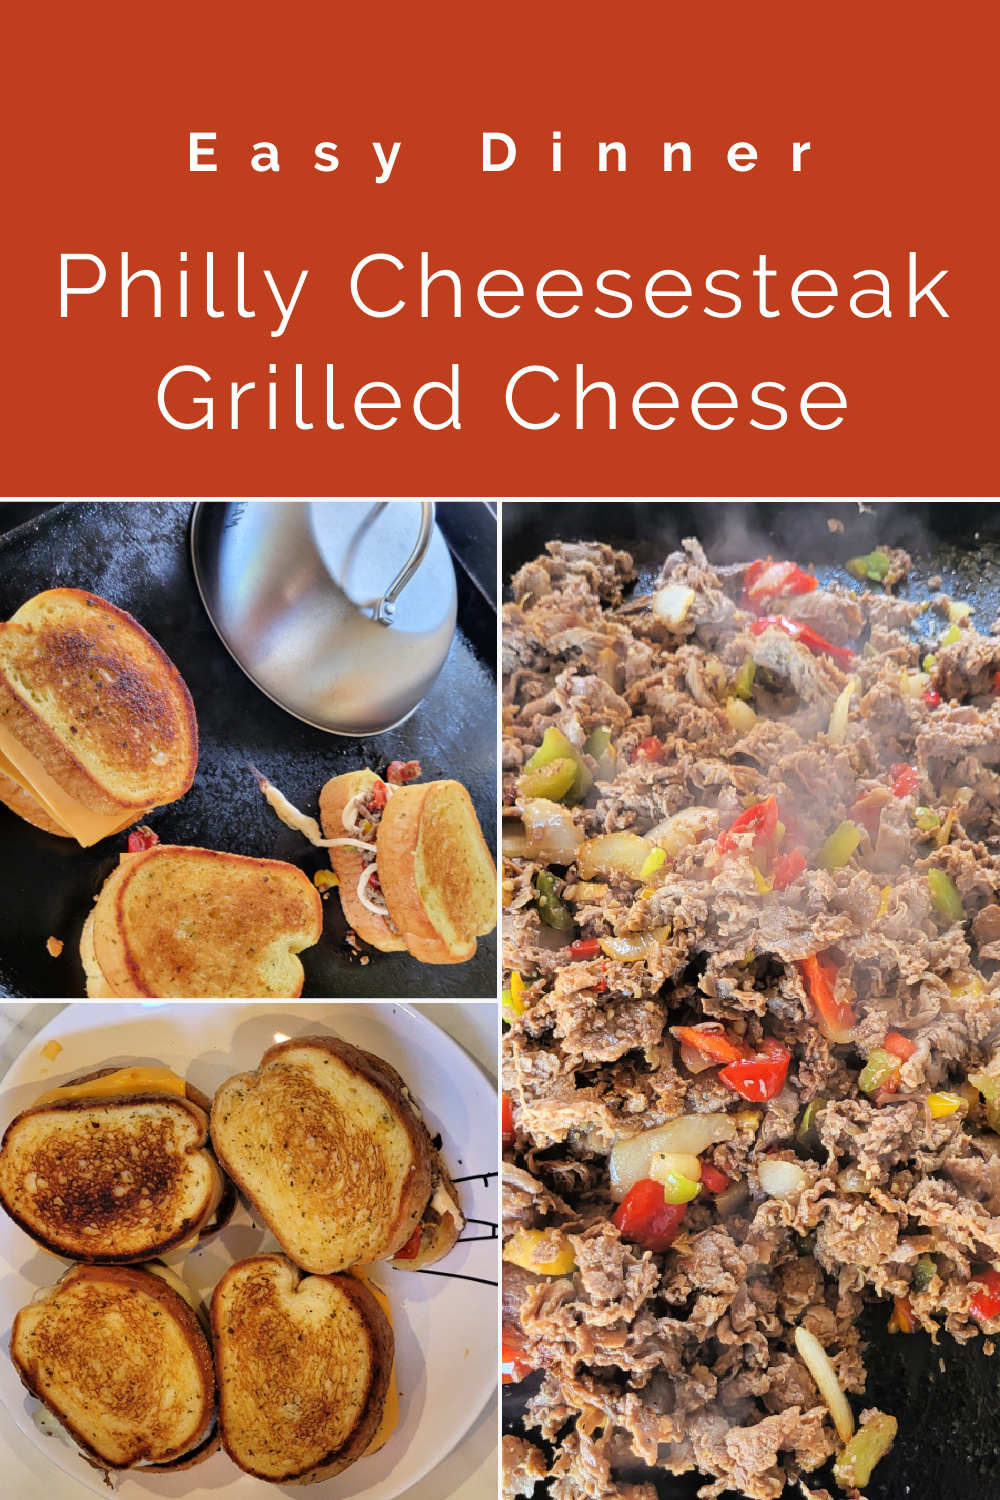 Blackstone Philly Cheesesteak Grilled Cheese Recipe